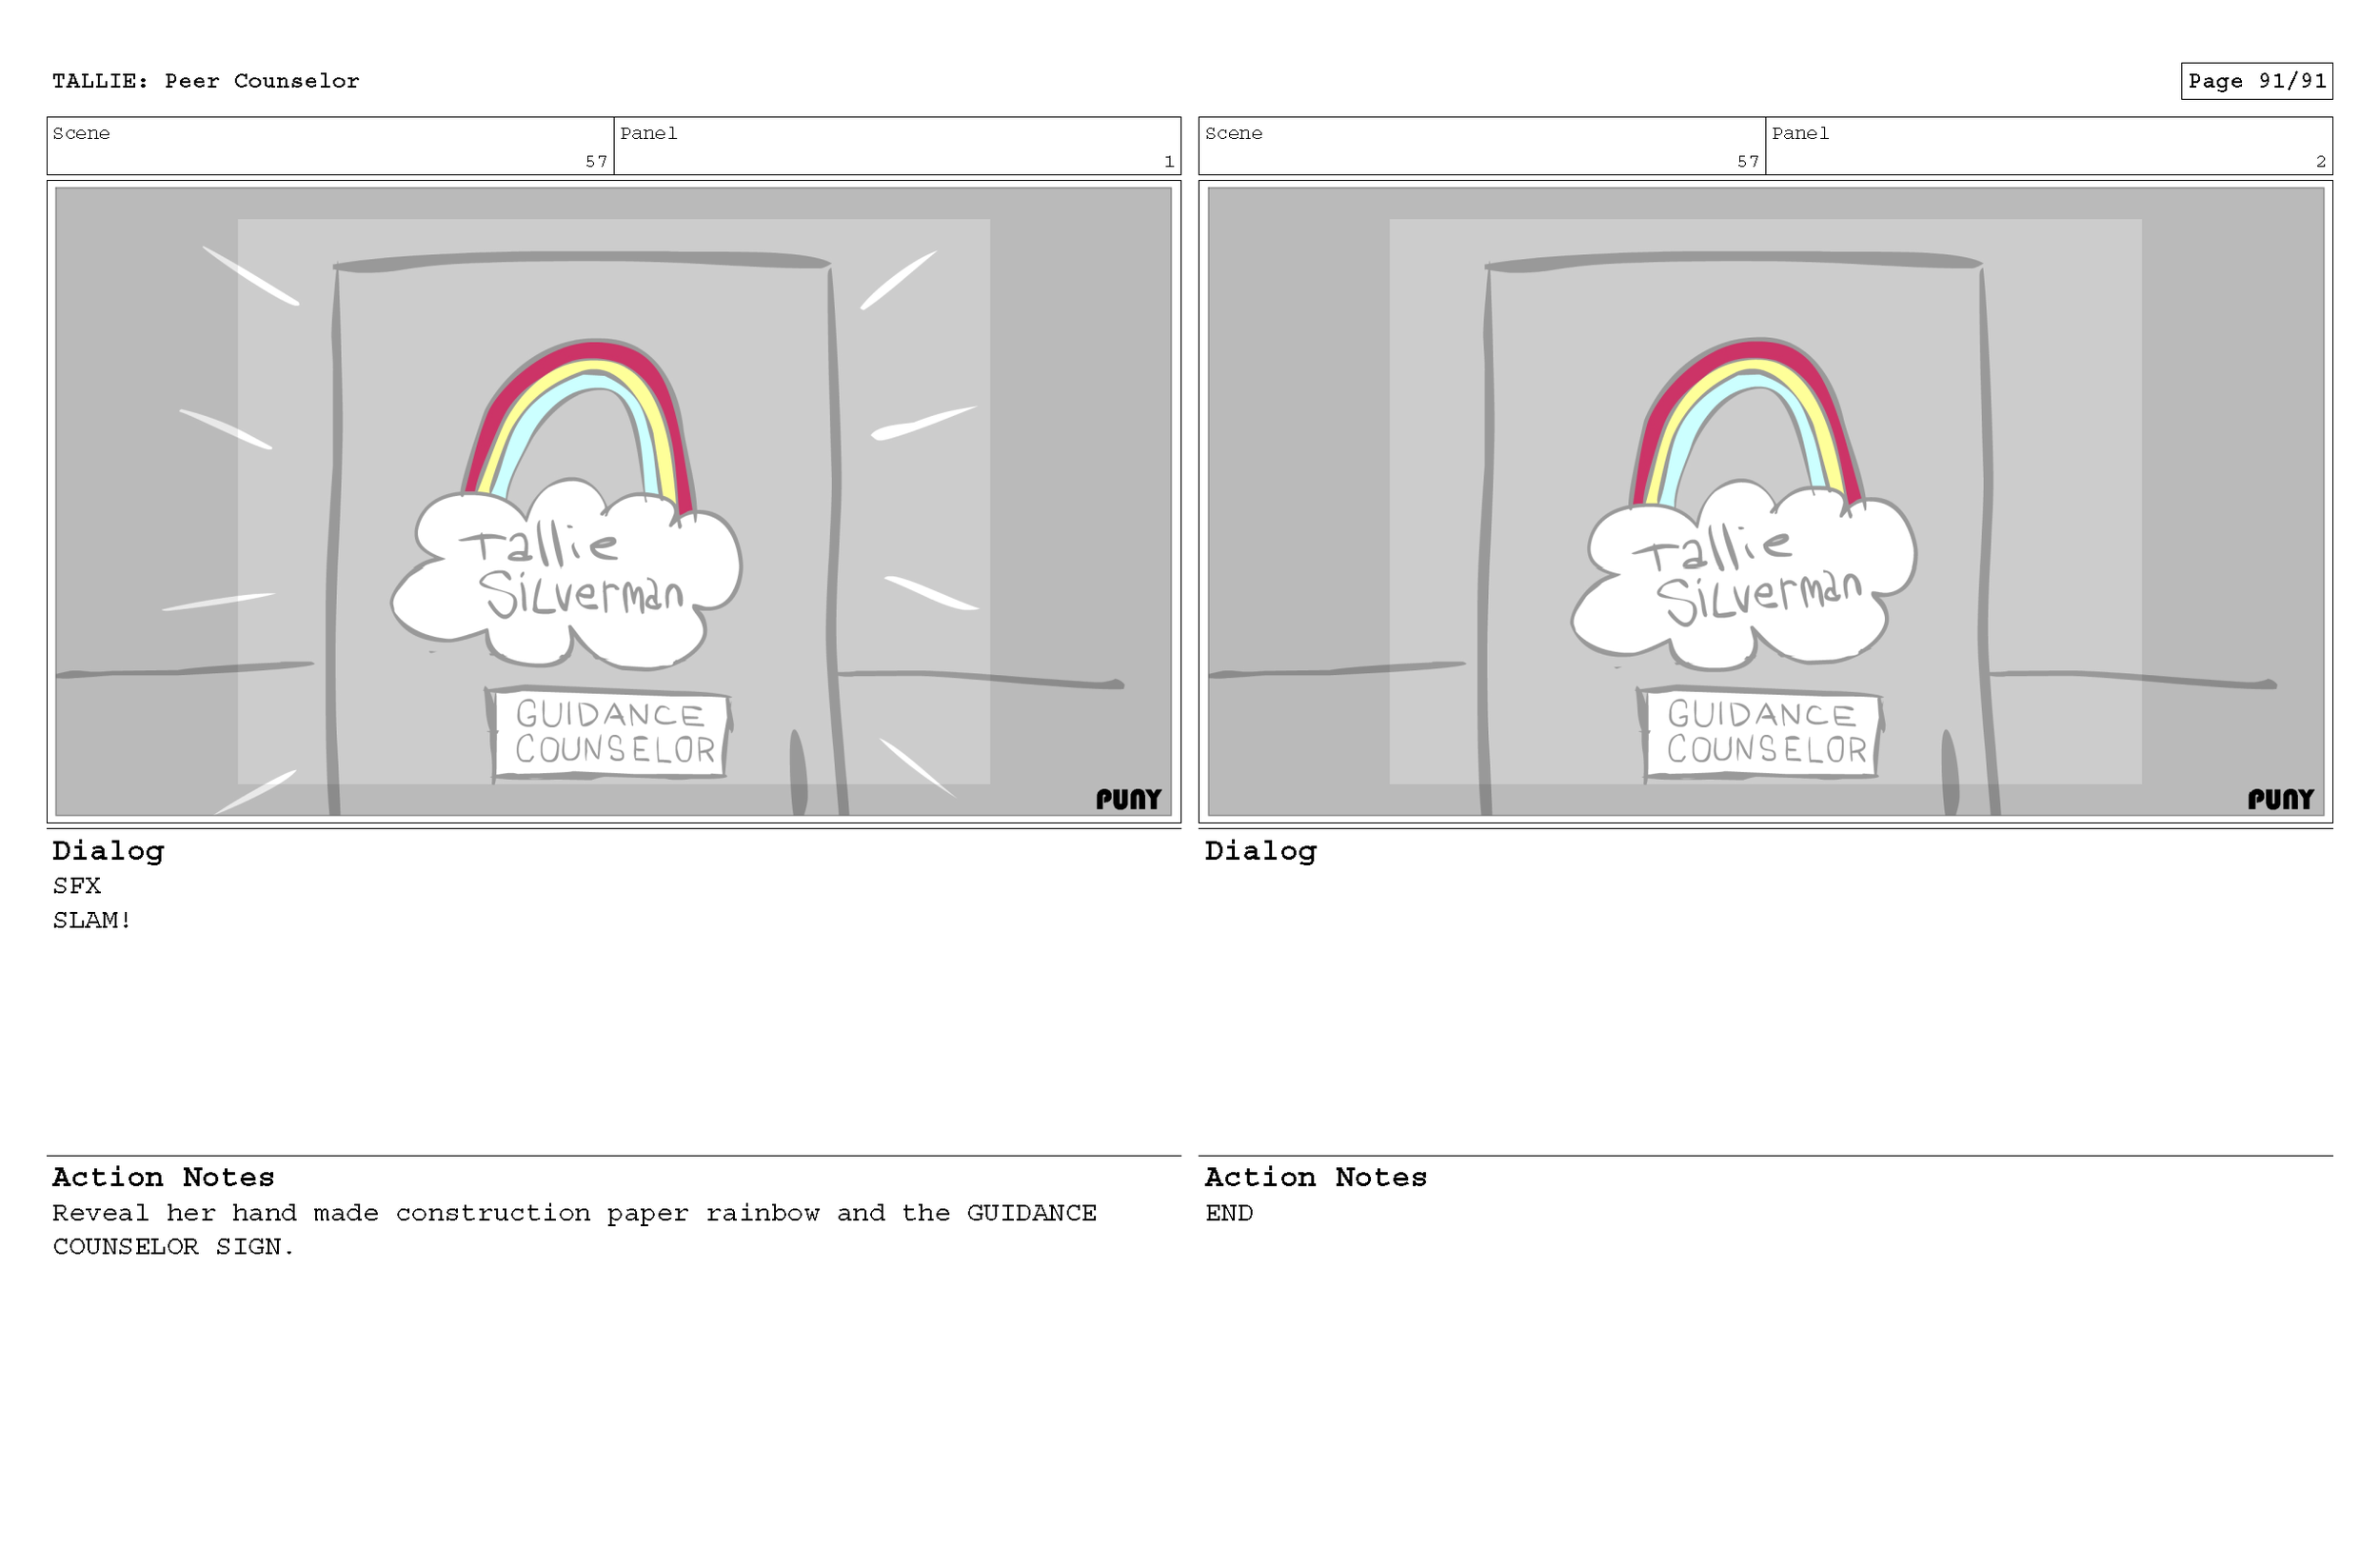 MikeOwens_STORYBOARDS_TallieSilverman_Page_92.png